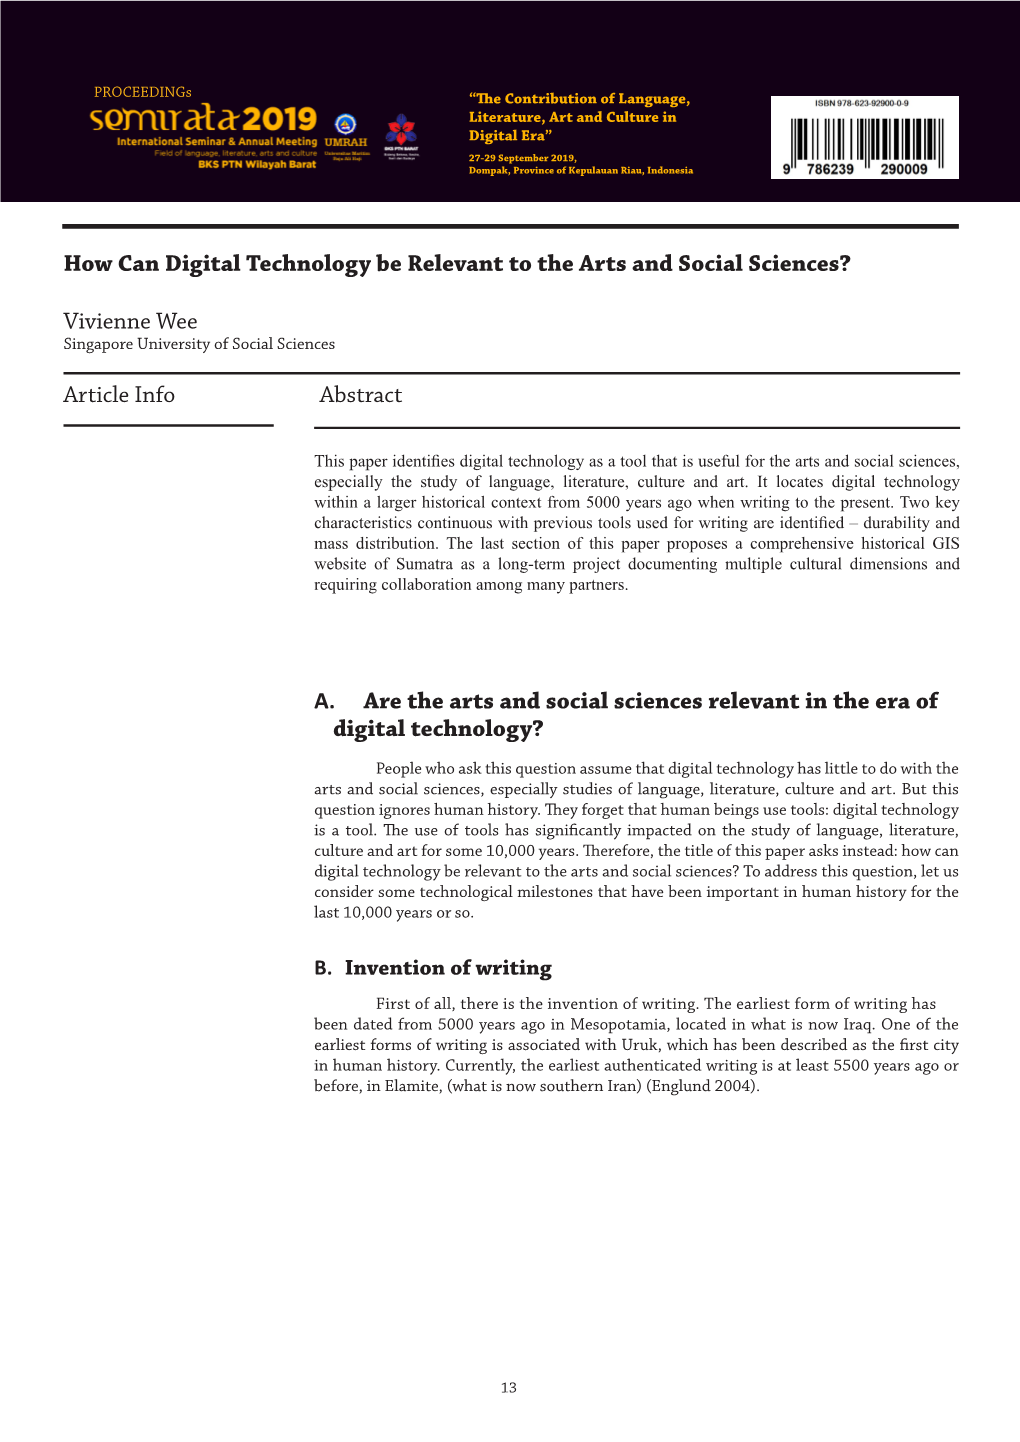 How Can Digital Technology Be Relevant to the Arts and Social Sciences?